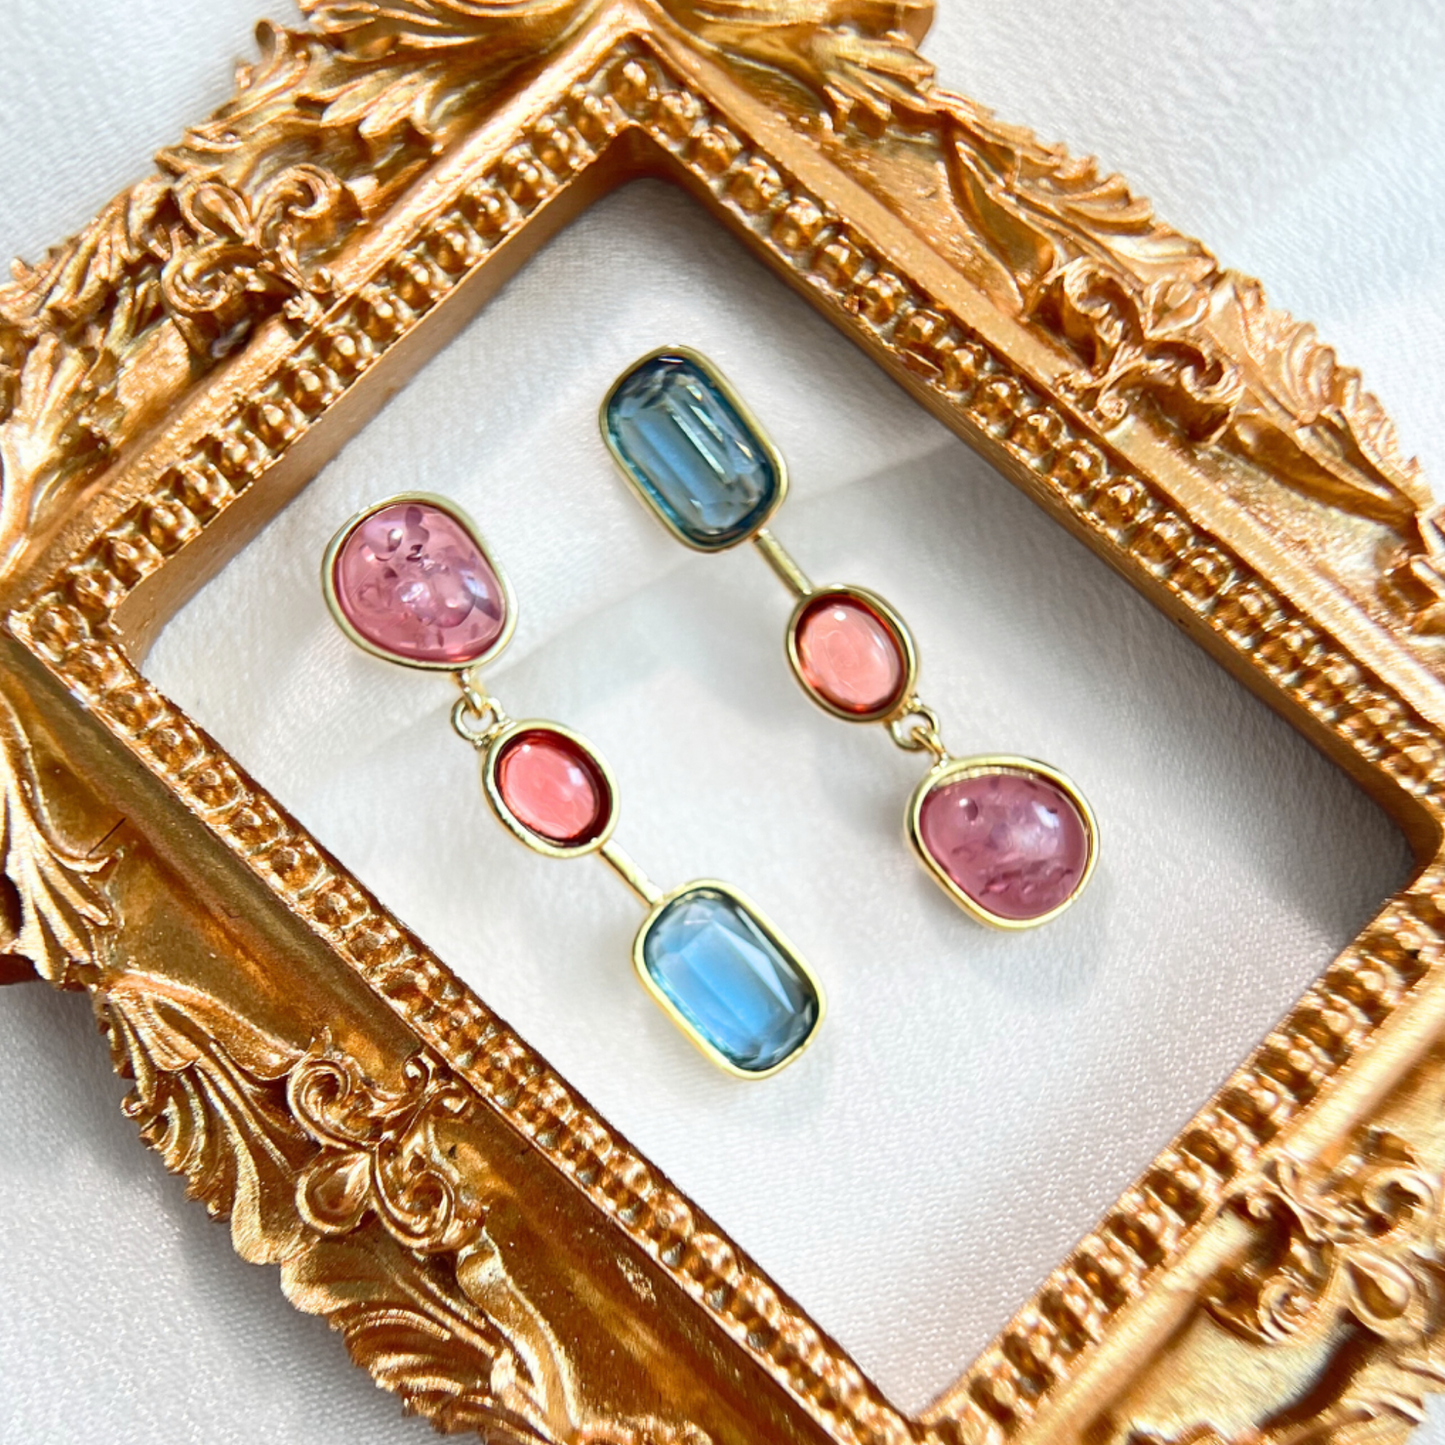 Mismatched Color Gemstone Clip On Earrings | Pink & Blue